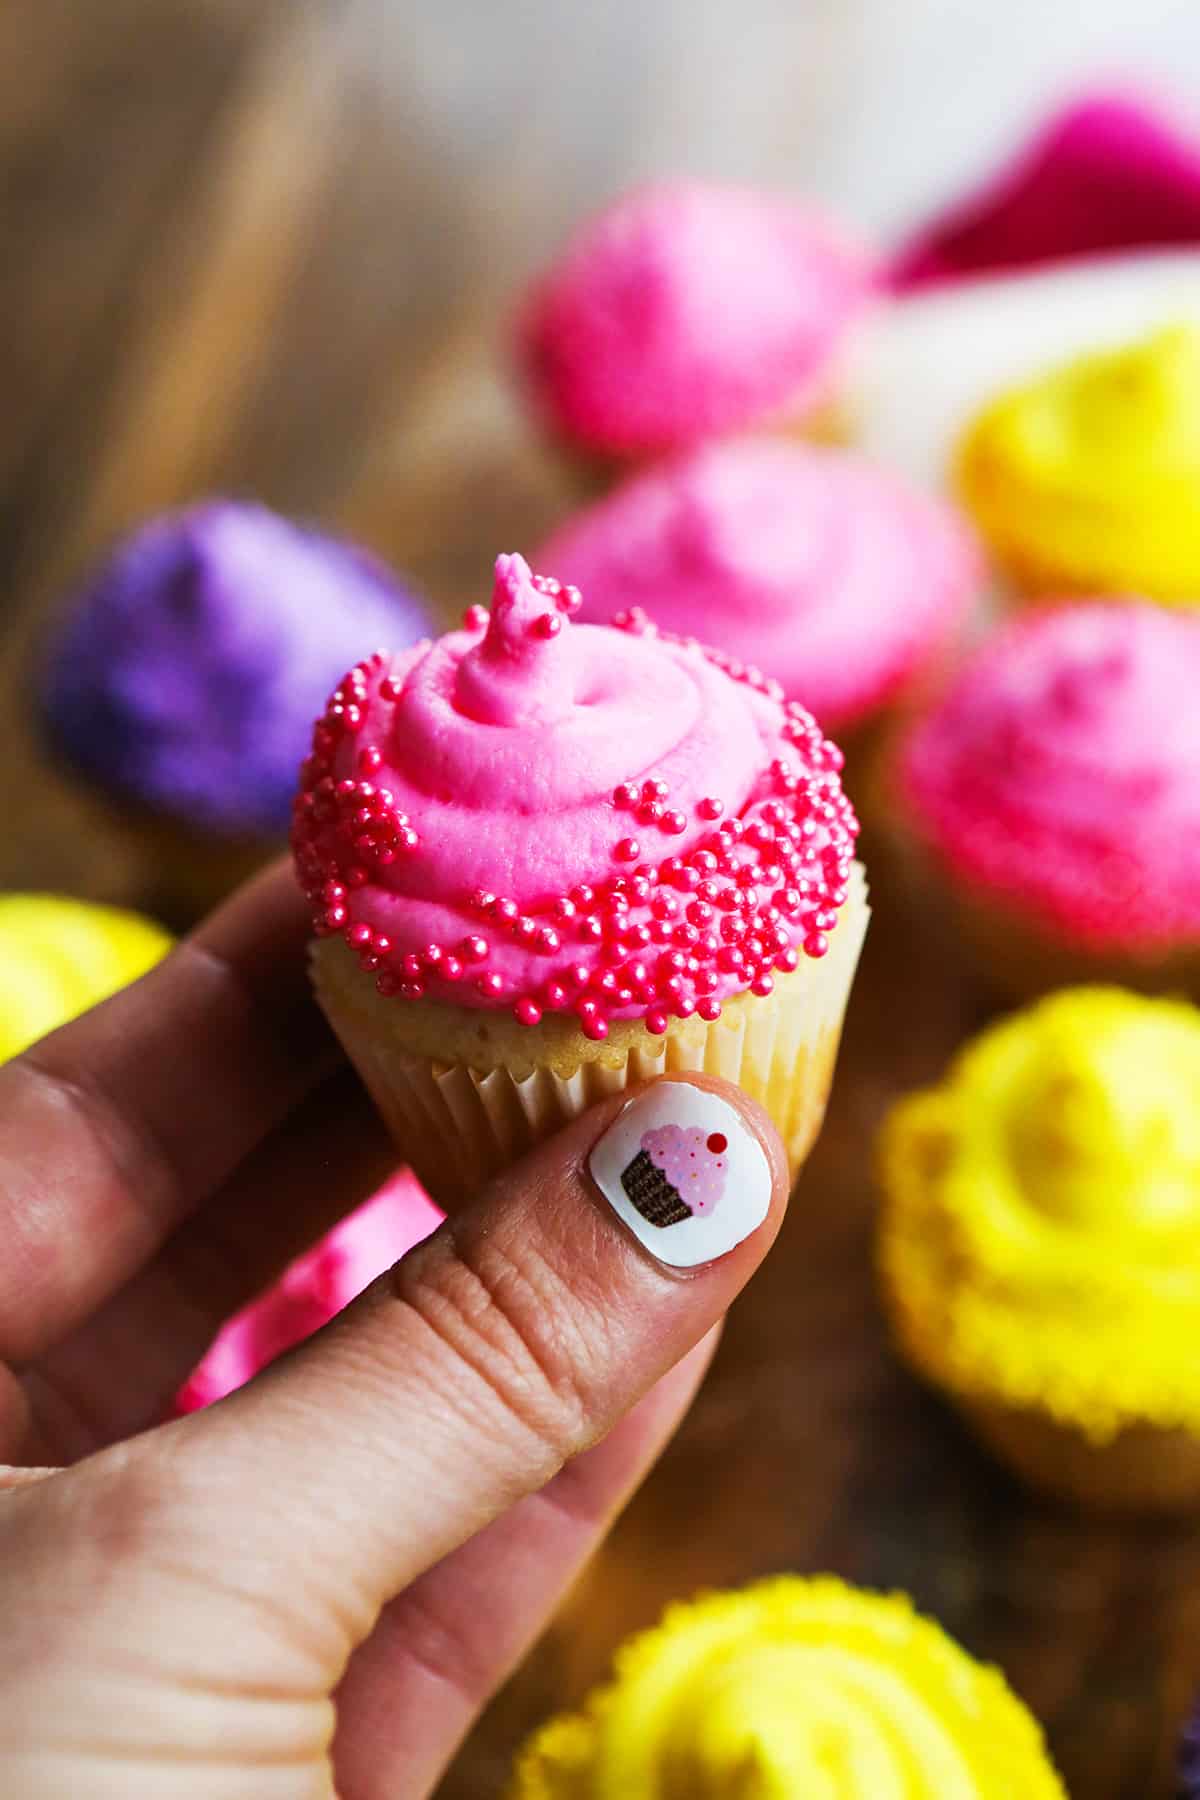 Hand holding a mini cupcake with pink frosting and decor.